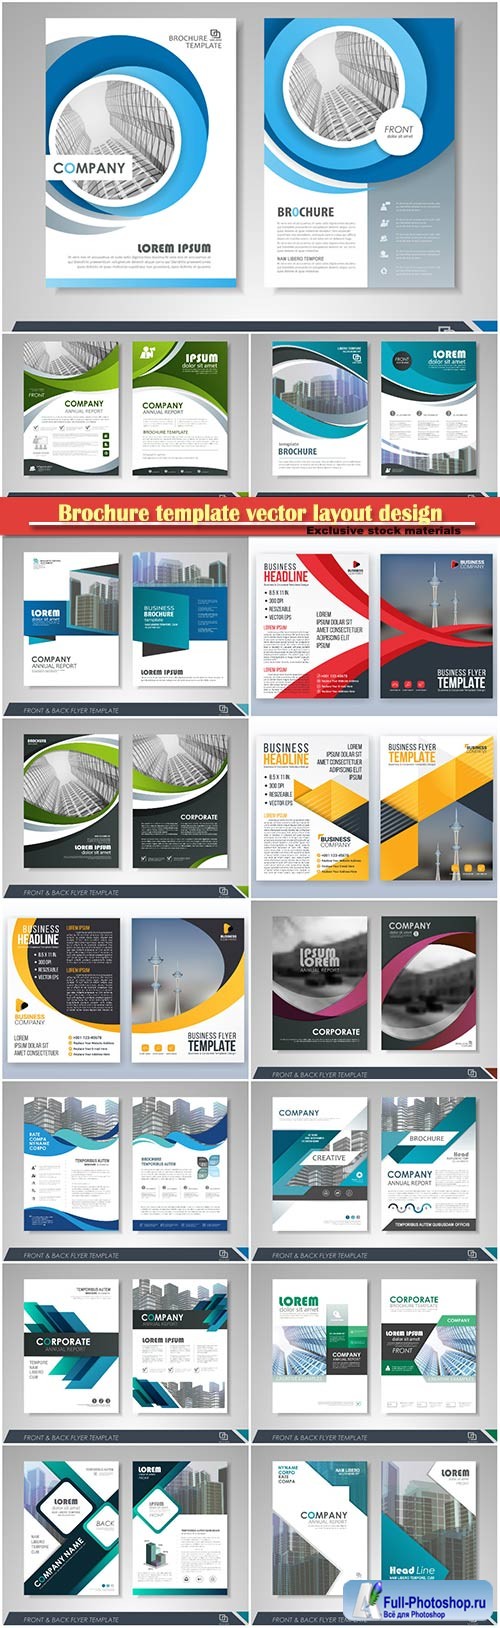 Brochure template vector layout design, corporate business annual report, magazine, flyer mockup # 210